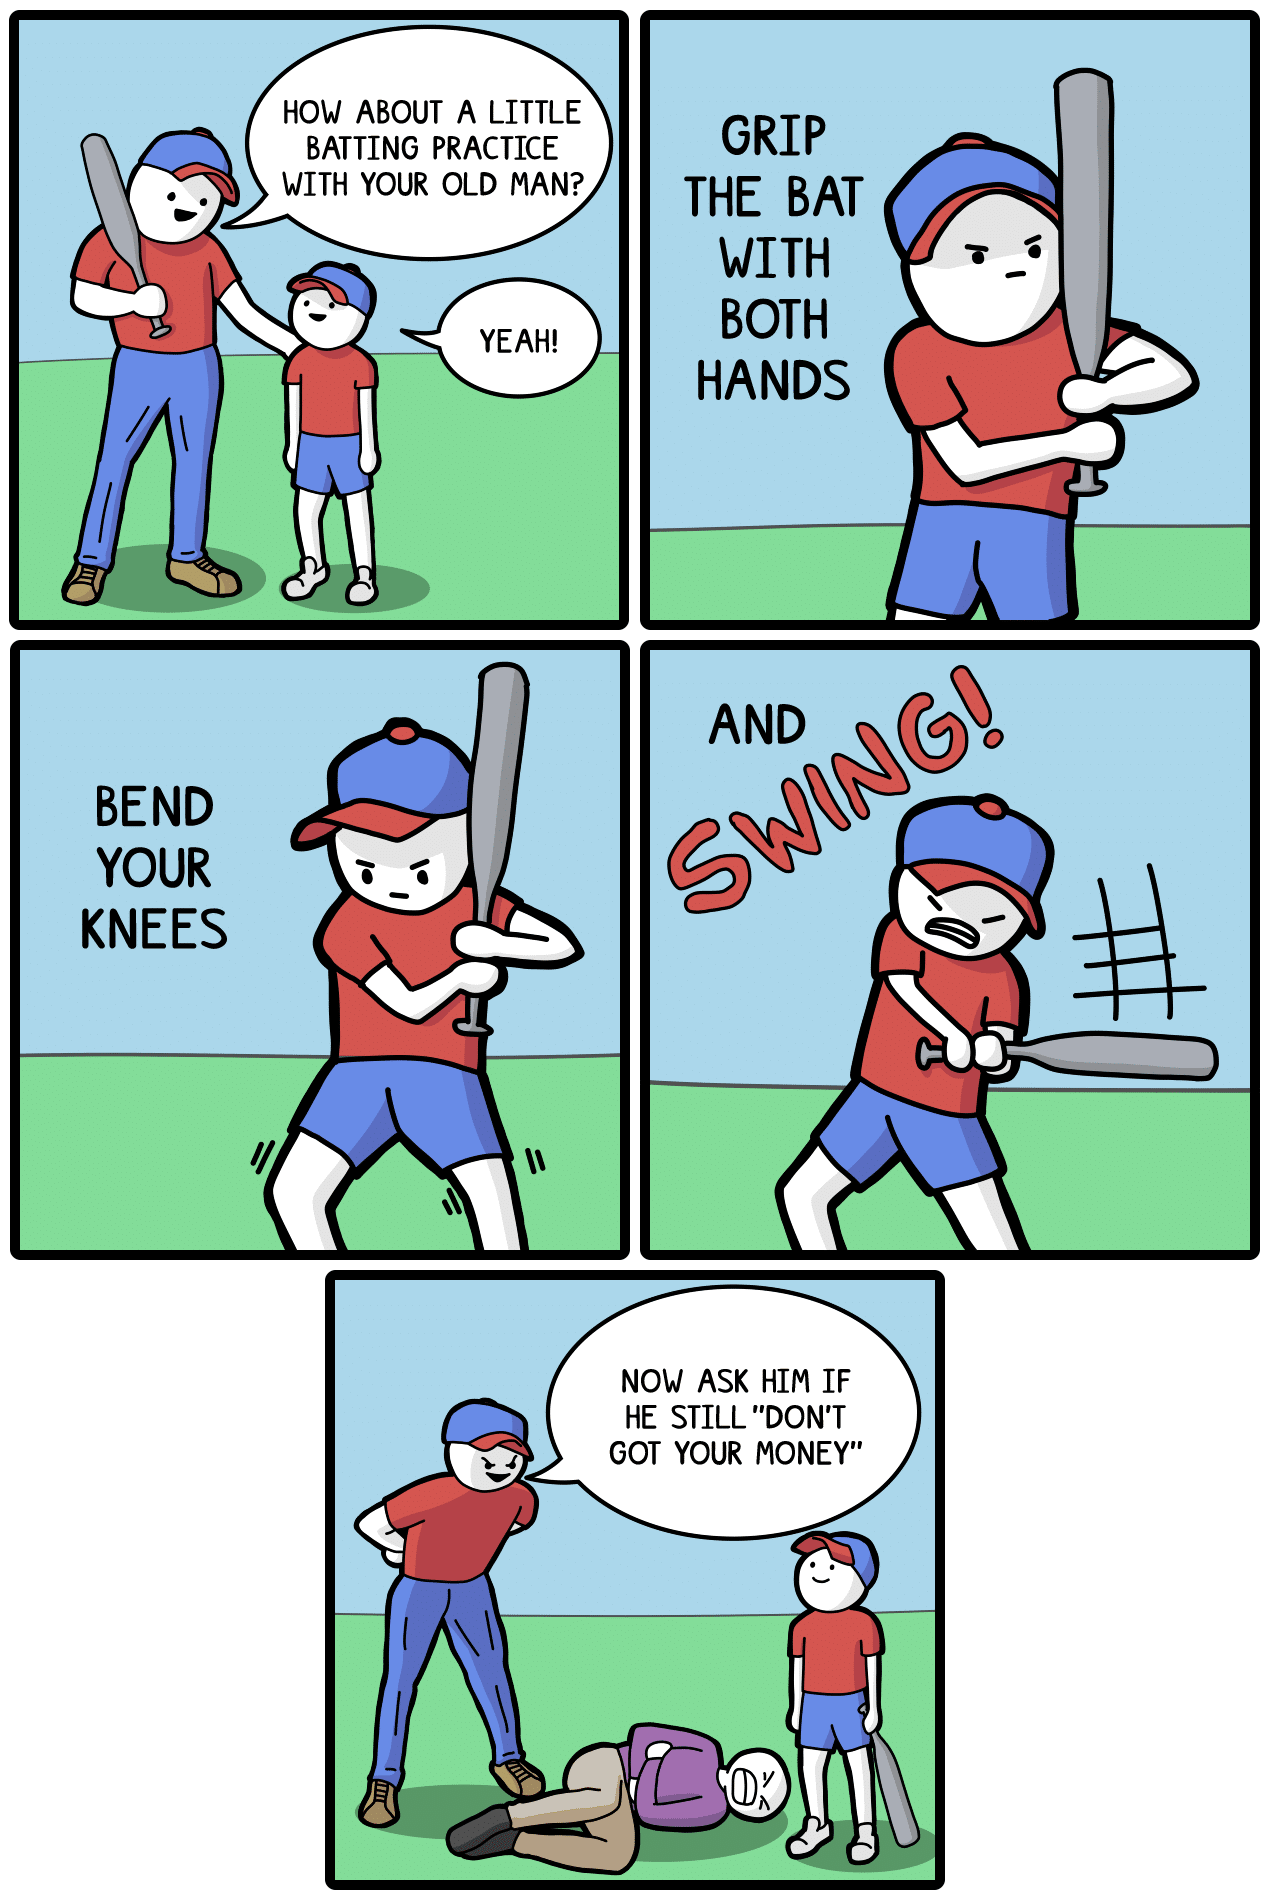 comics comics comics text: HOW ABOUT A LITTLE BATTING PRACTICE WITH YOUR OLD MAN? YEAH! BEND YOUR KNEES GRIP THE BAT WITH BOTH HANDS AND NOW ASK HIM IF HE STILL 